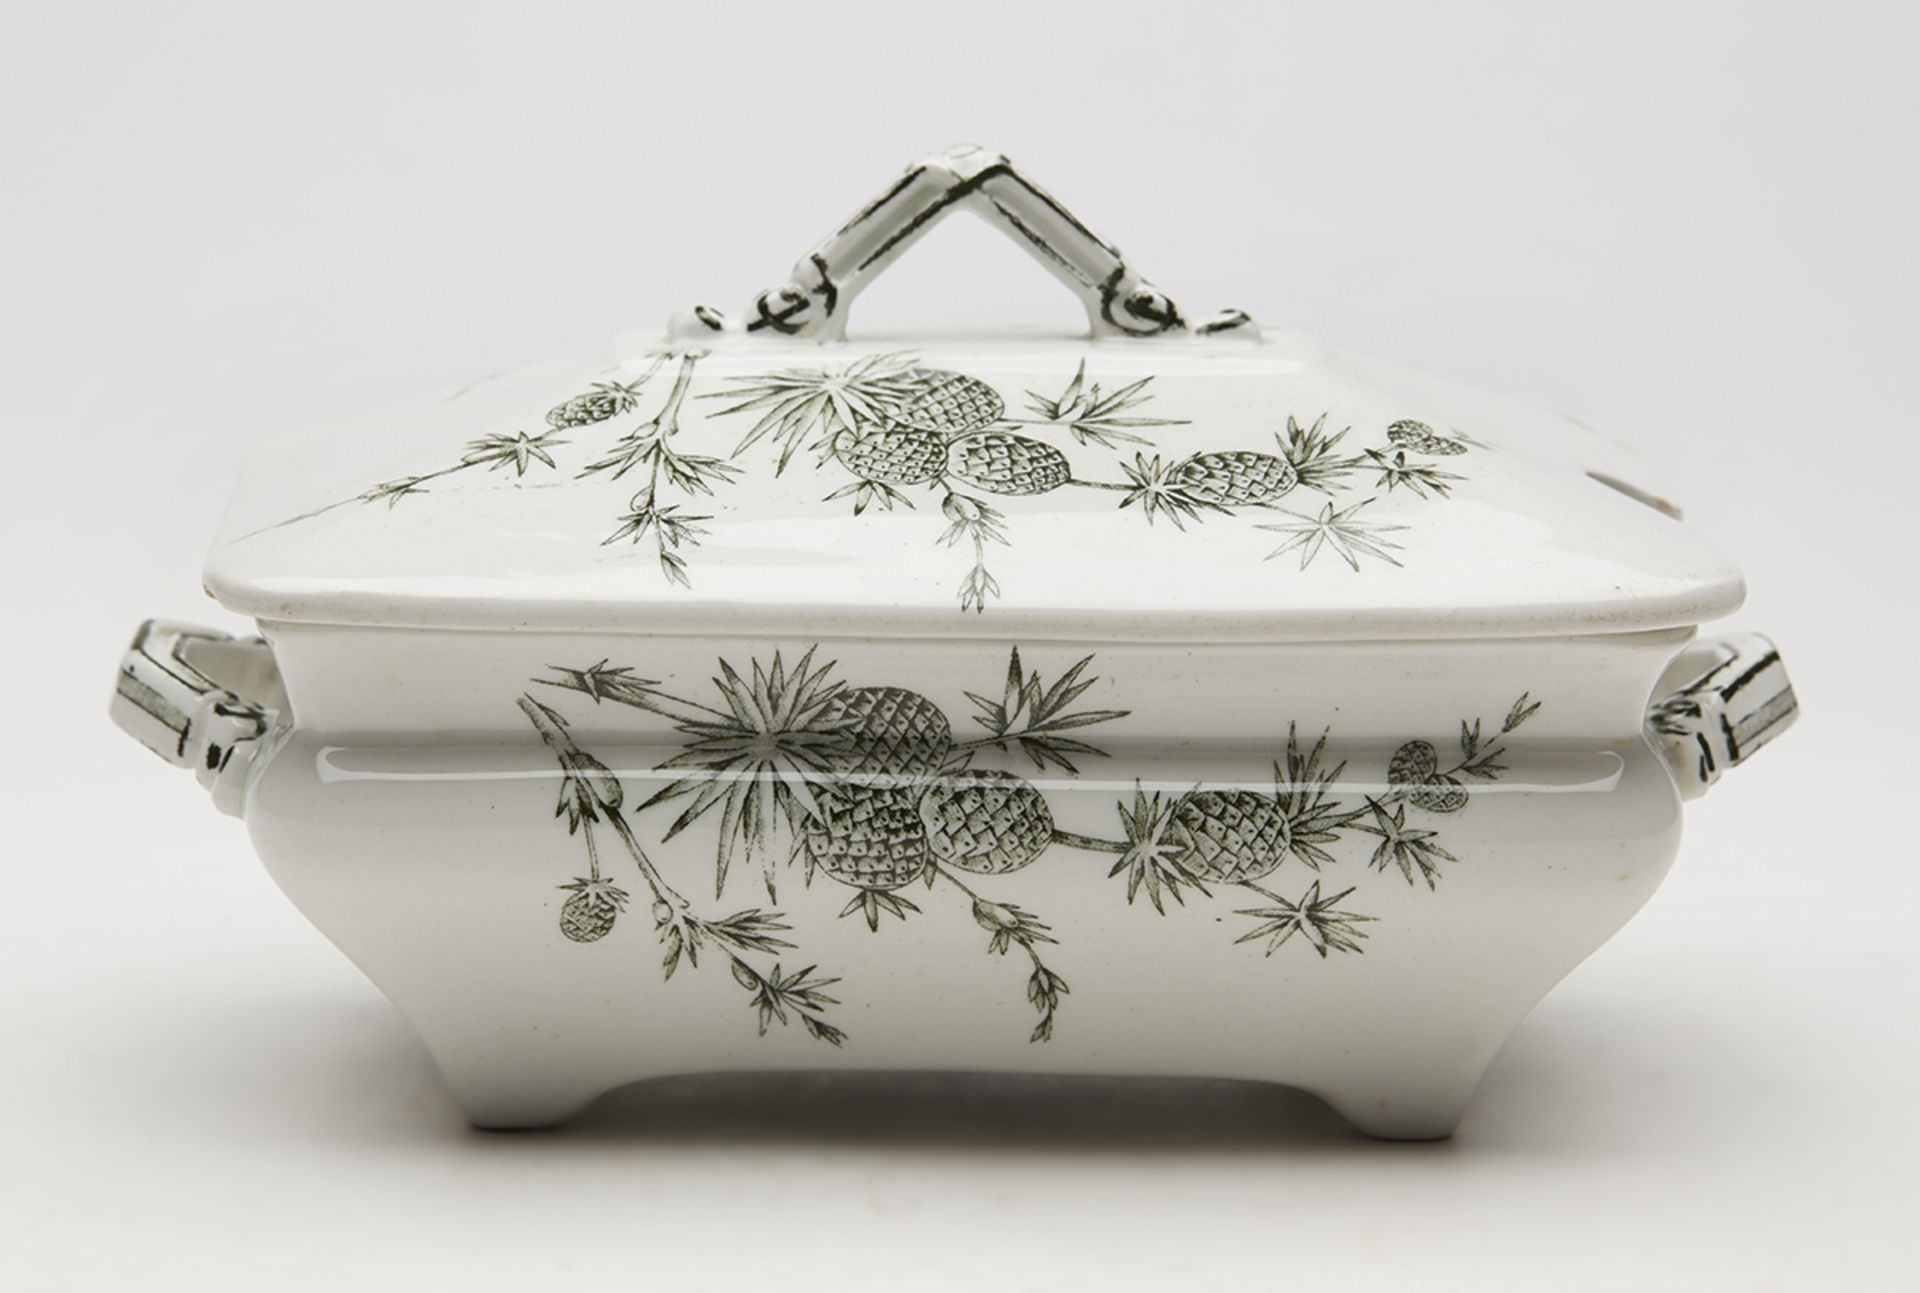 AESTHETIC MOVEMENT RIDGWAYS PINE CONE CENIS SAUCE BOAT 1871   DIMENSIONS   Height 11cm, Length 18,